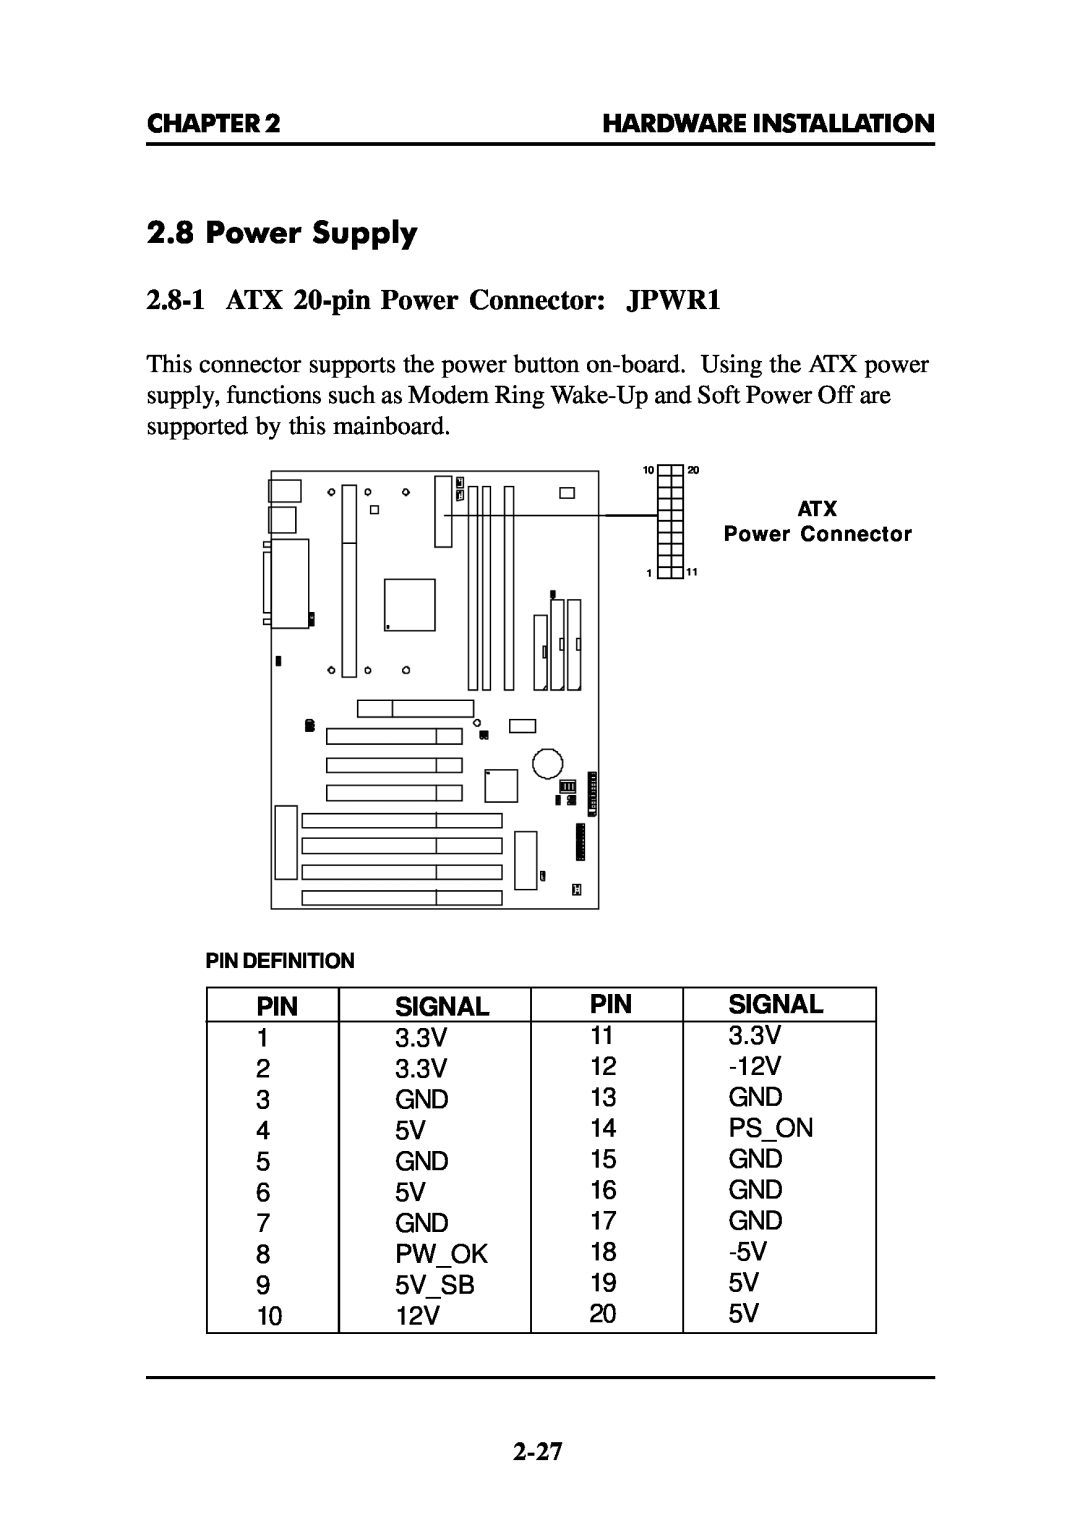 Intel MS-6112 manual Power Supply, 2.8-1ATX 20-pinPower Connector JPWR1, Signal 